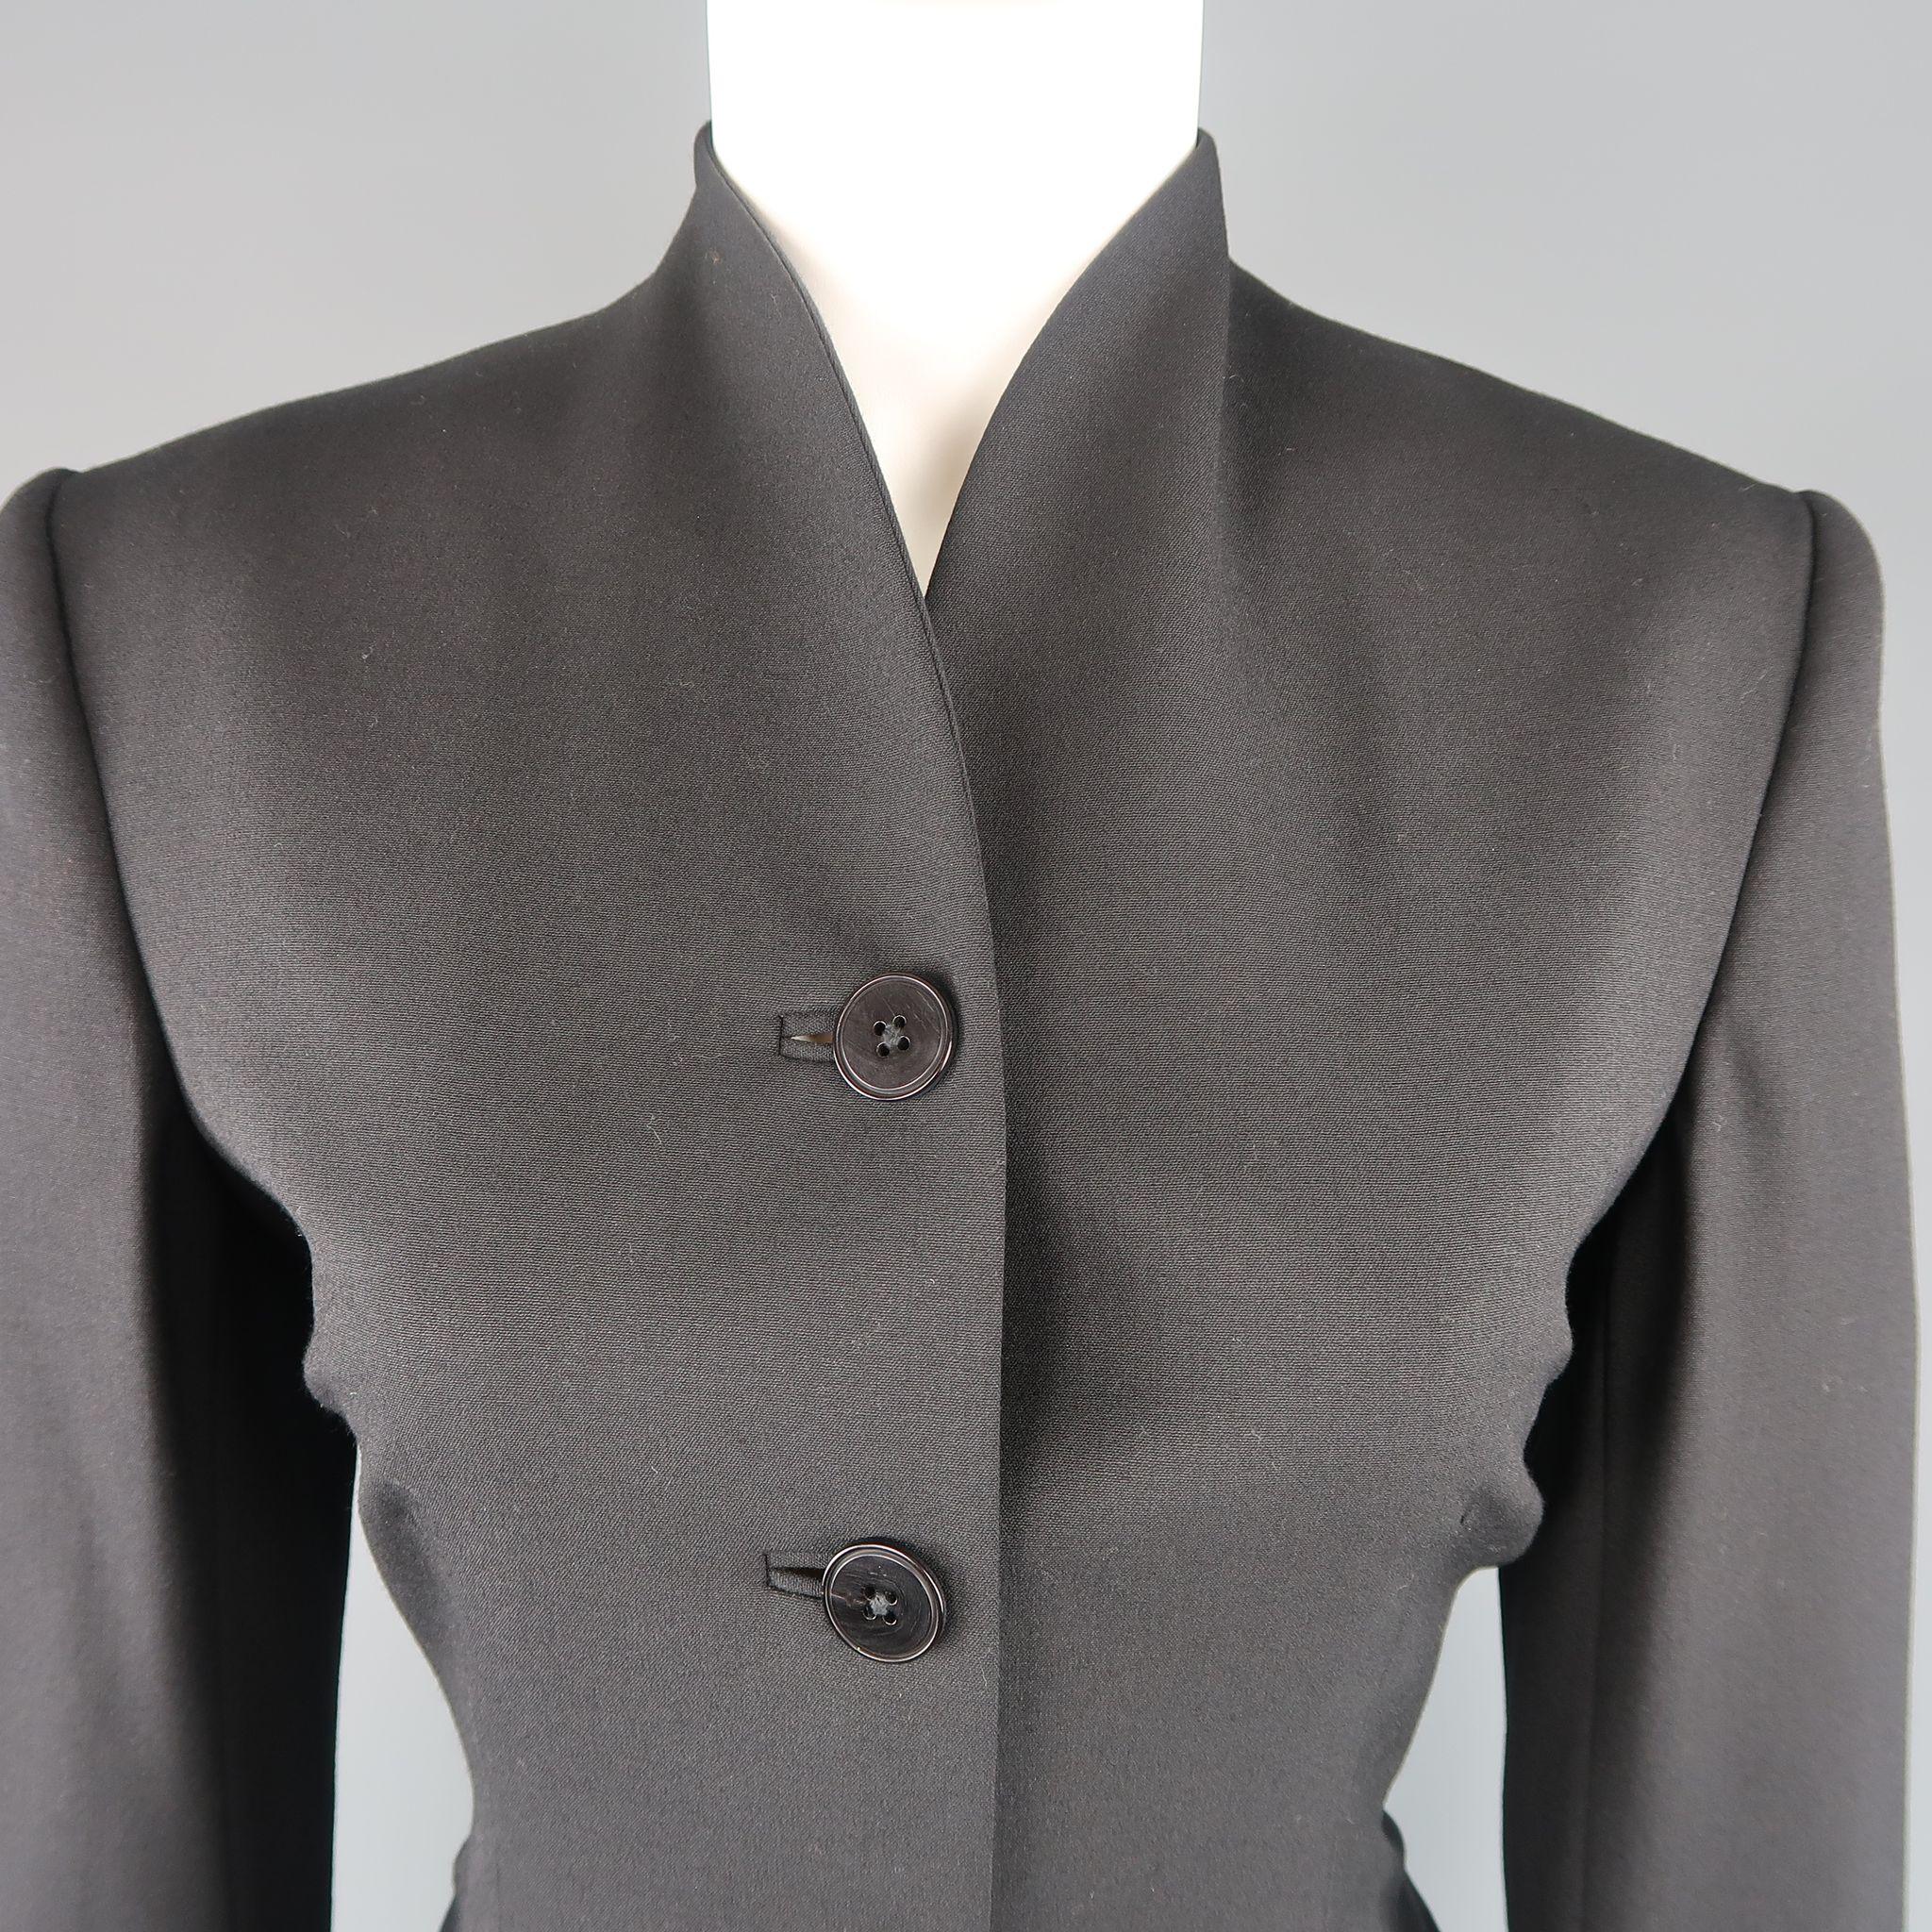 RALPH LAUREN BLACK LABEL jacket comes in black wool with a four button front, cropped,tailored silhouette, and stand up collar. Small imperfection on back. Made in USA.
 
Good Pre-Owned Condition.
Marked: 6
 
Measurements:
 
Shoulder: 16 in.
Bust: 